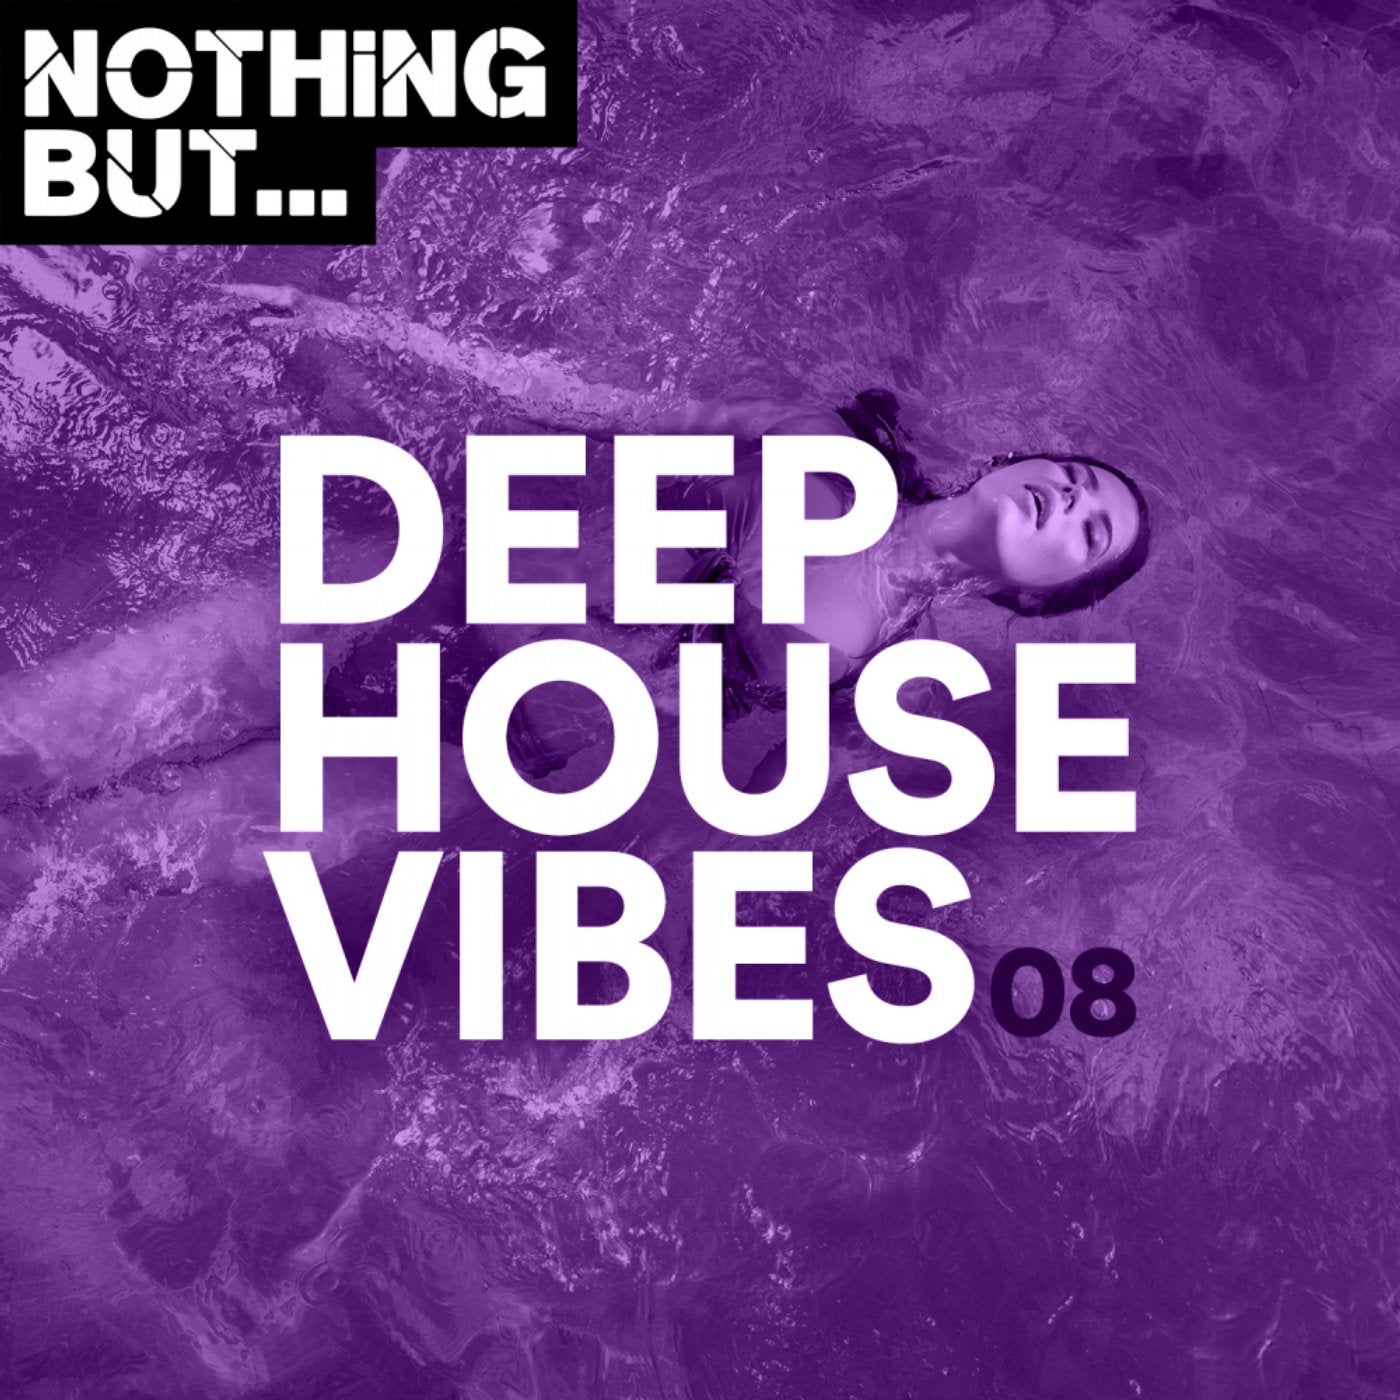 Nothing But... Deep House Vibes, Vol. 08